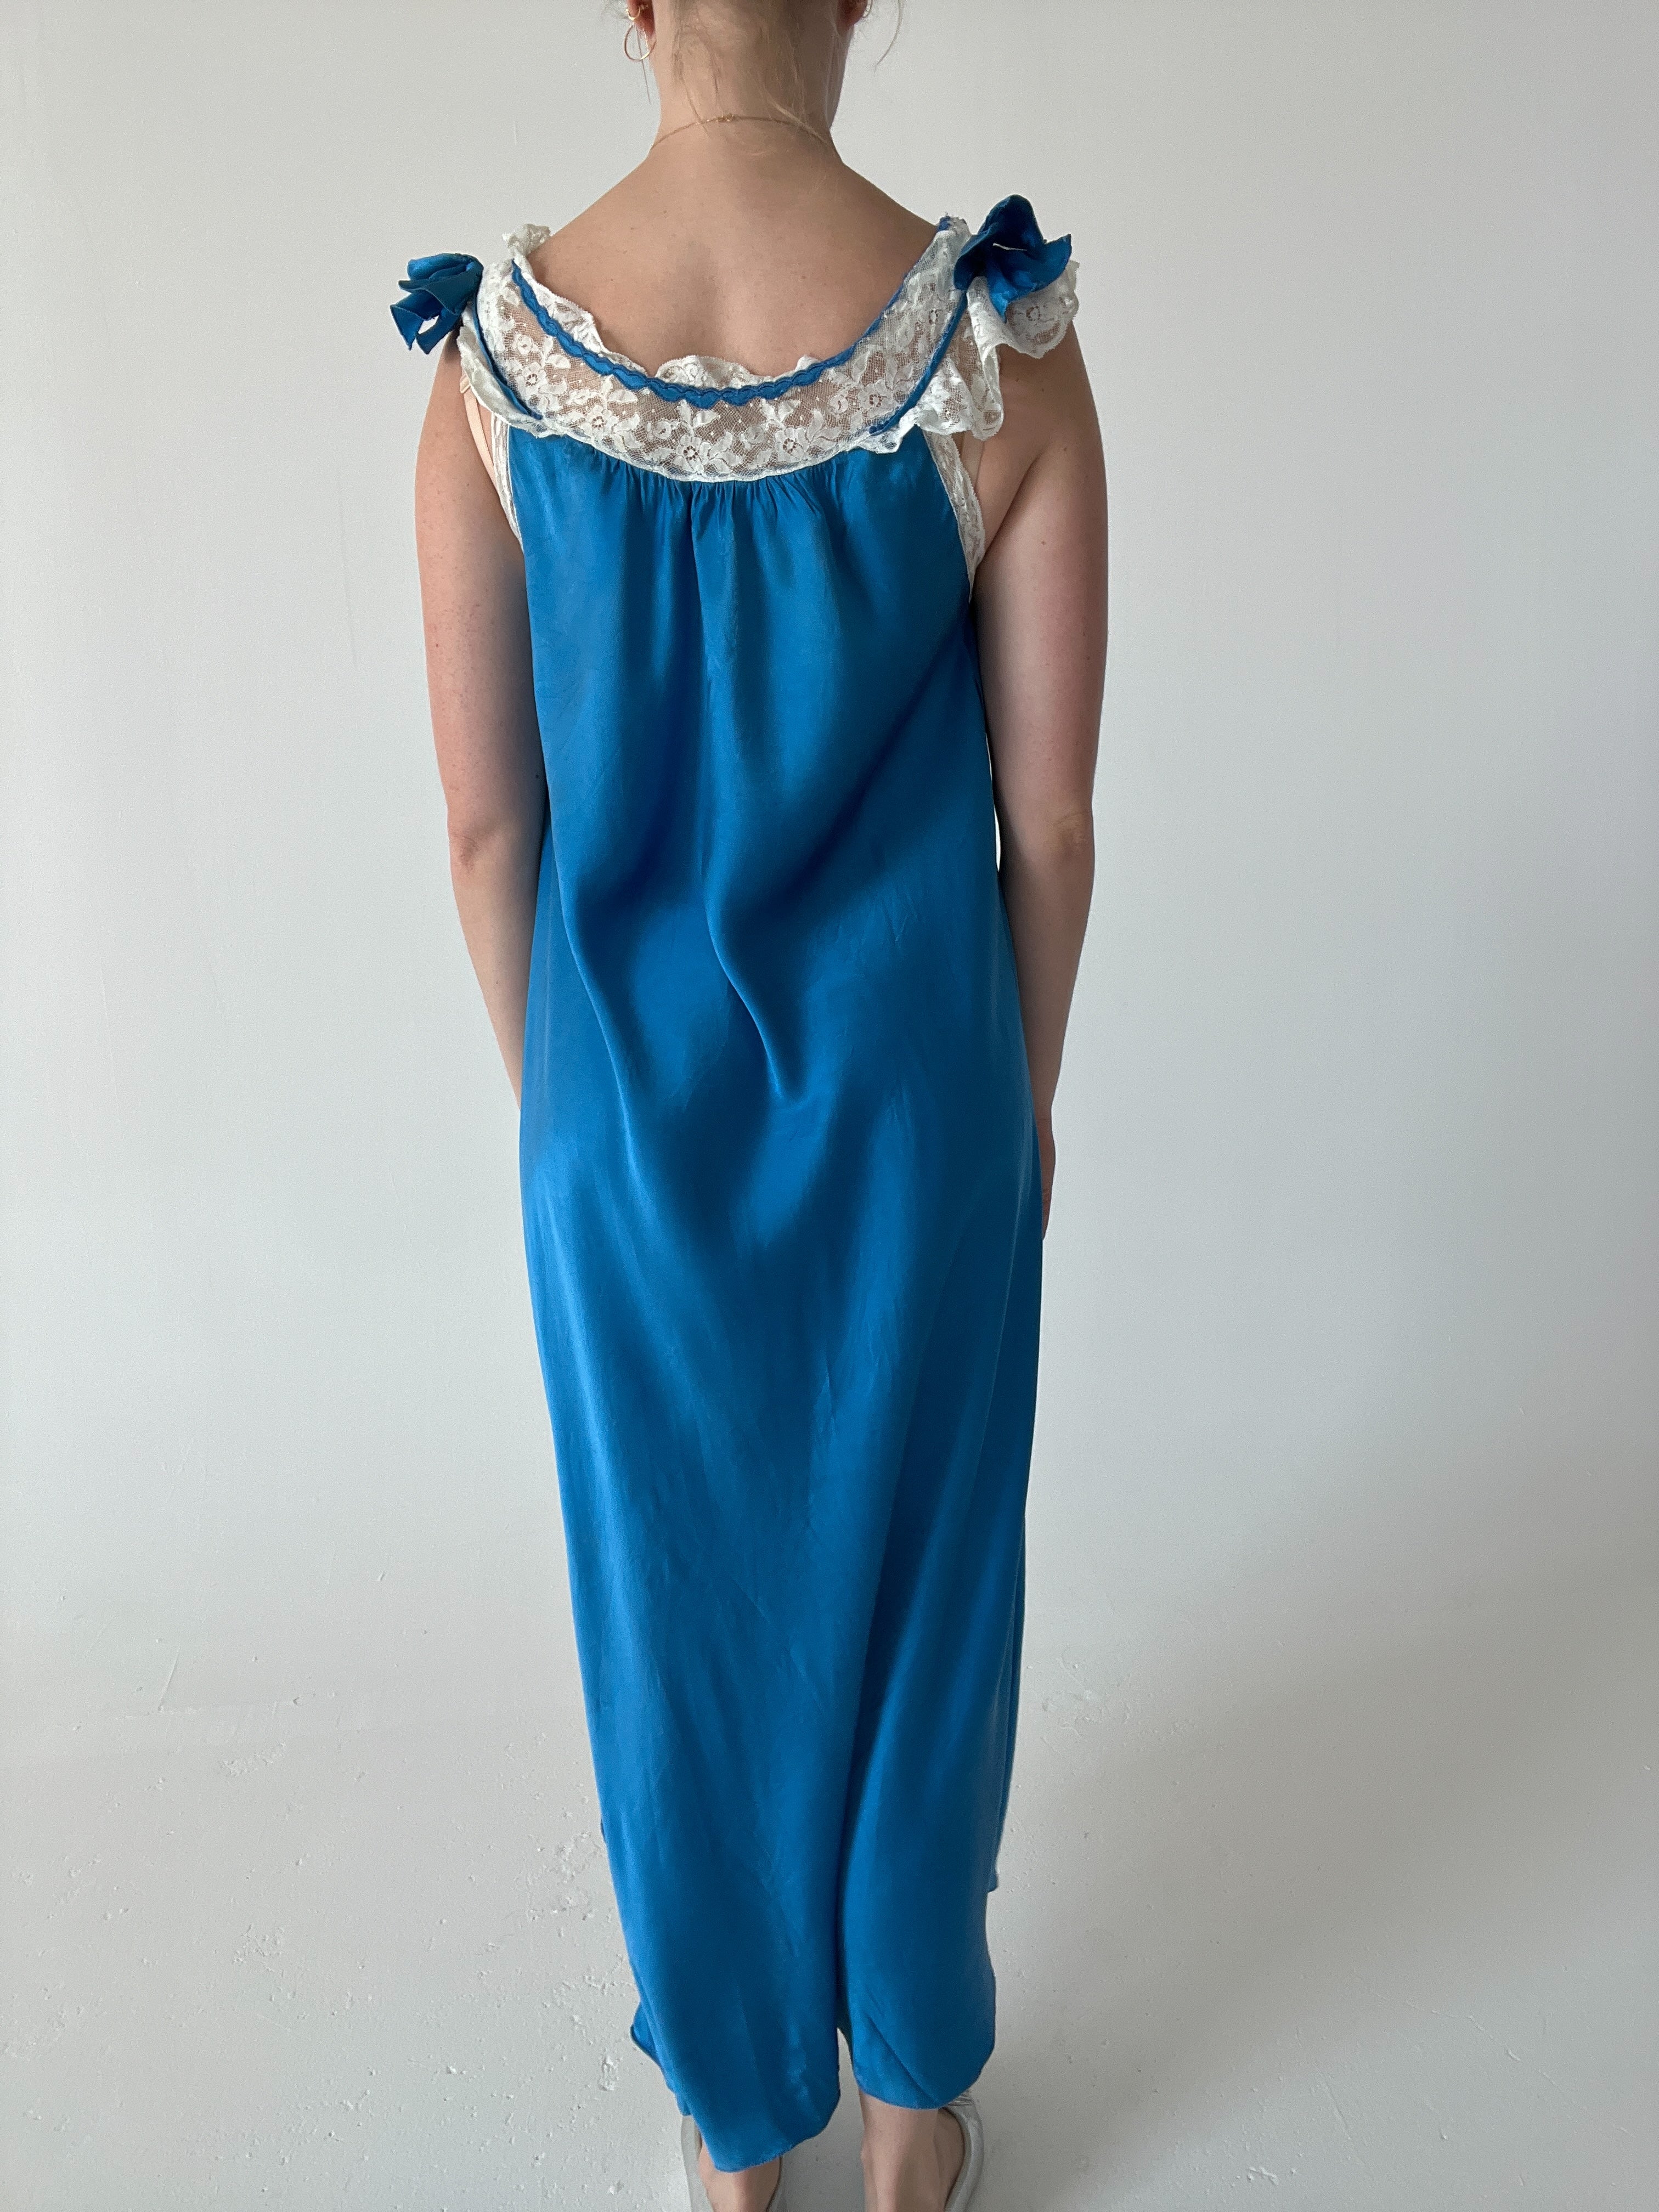 1930's Deep Ocean Blue Silk Dress with White Lace